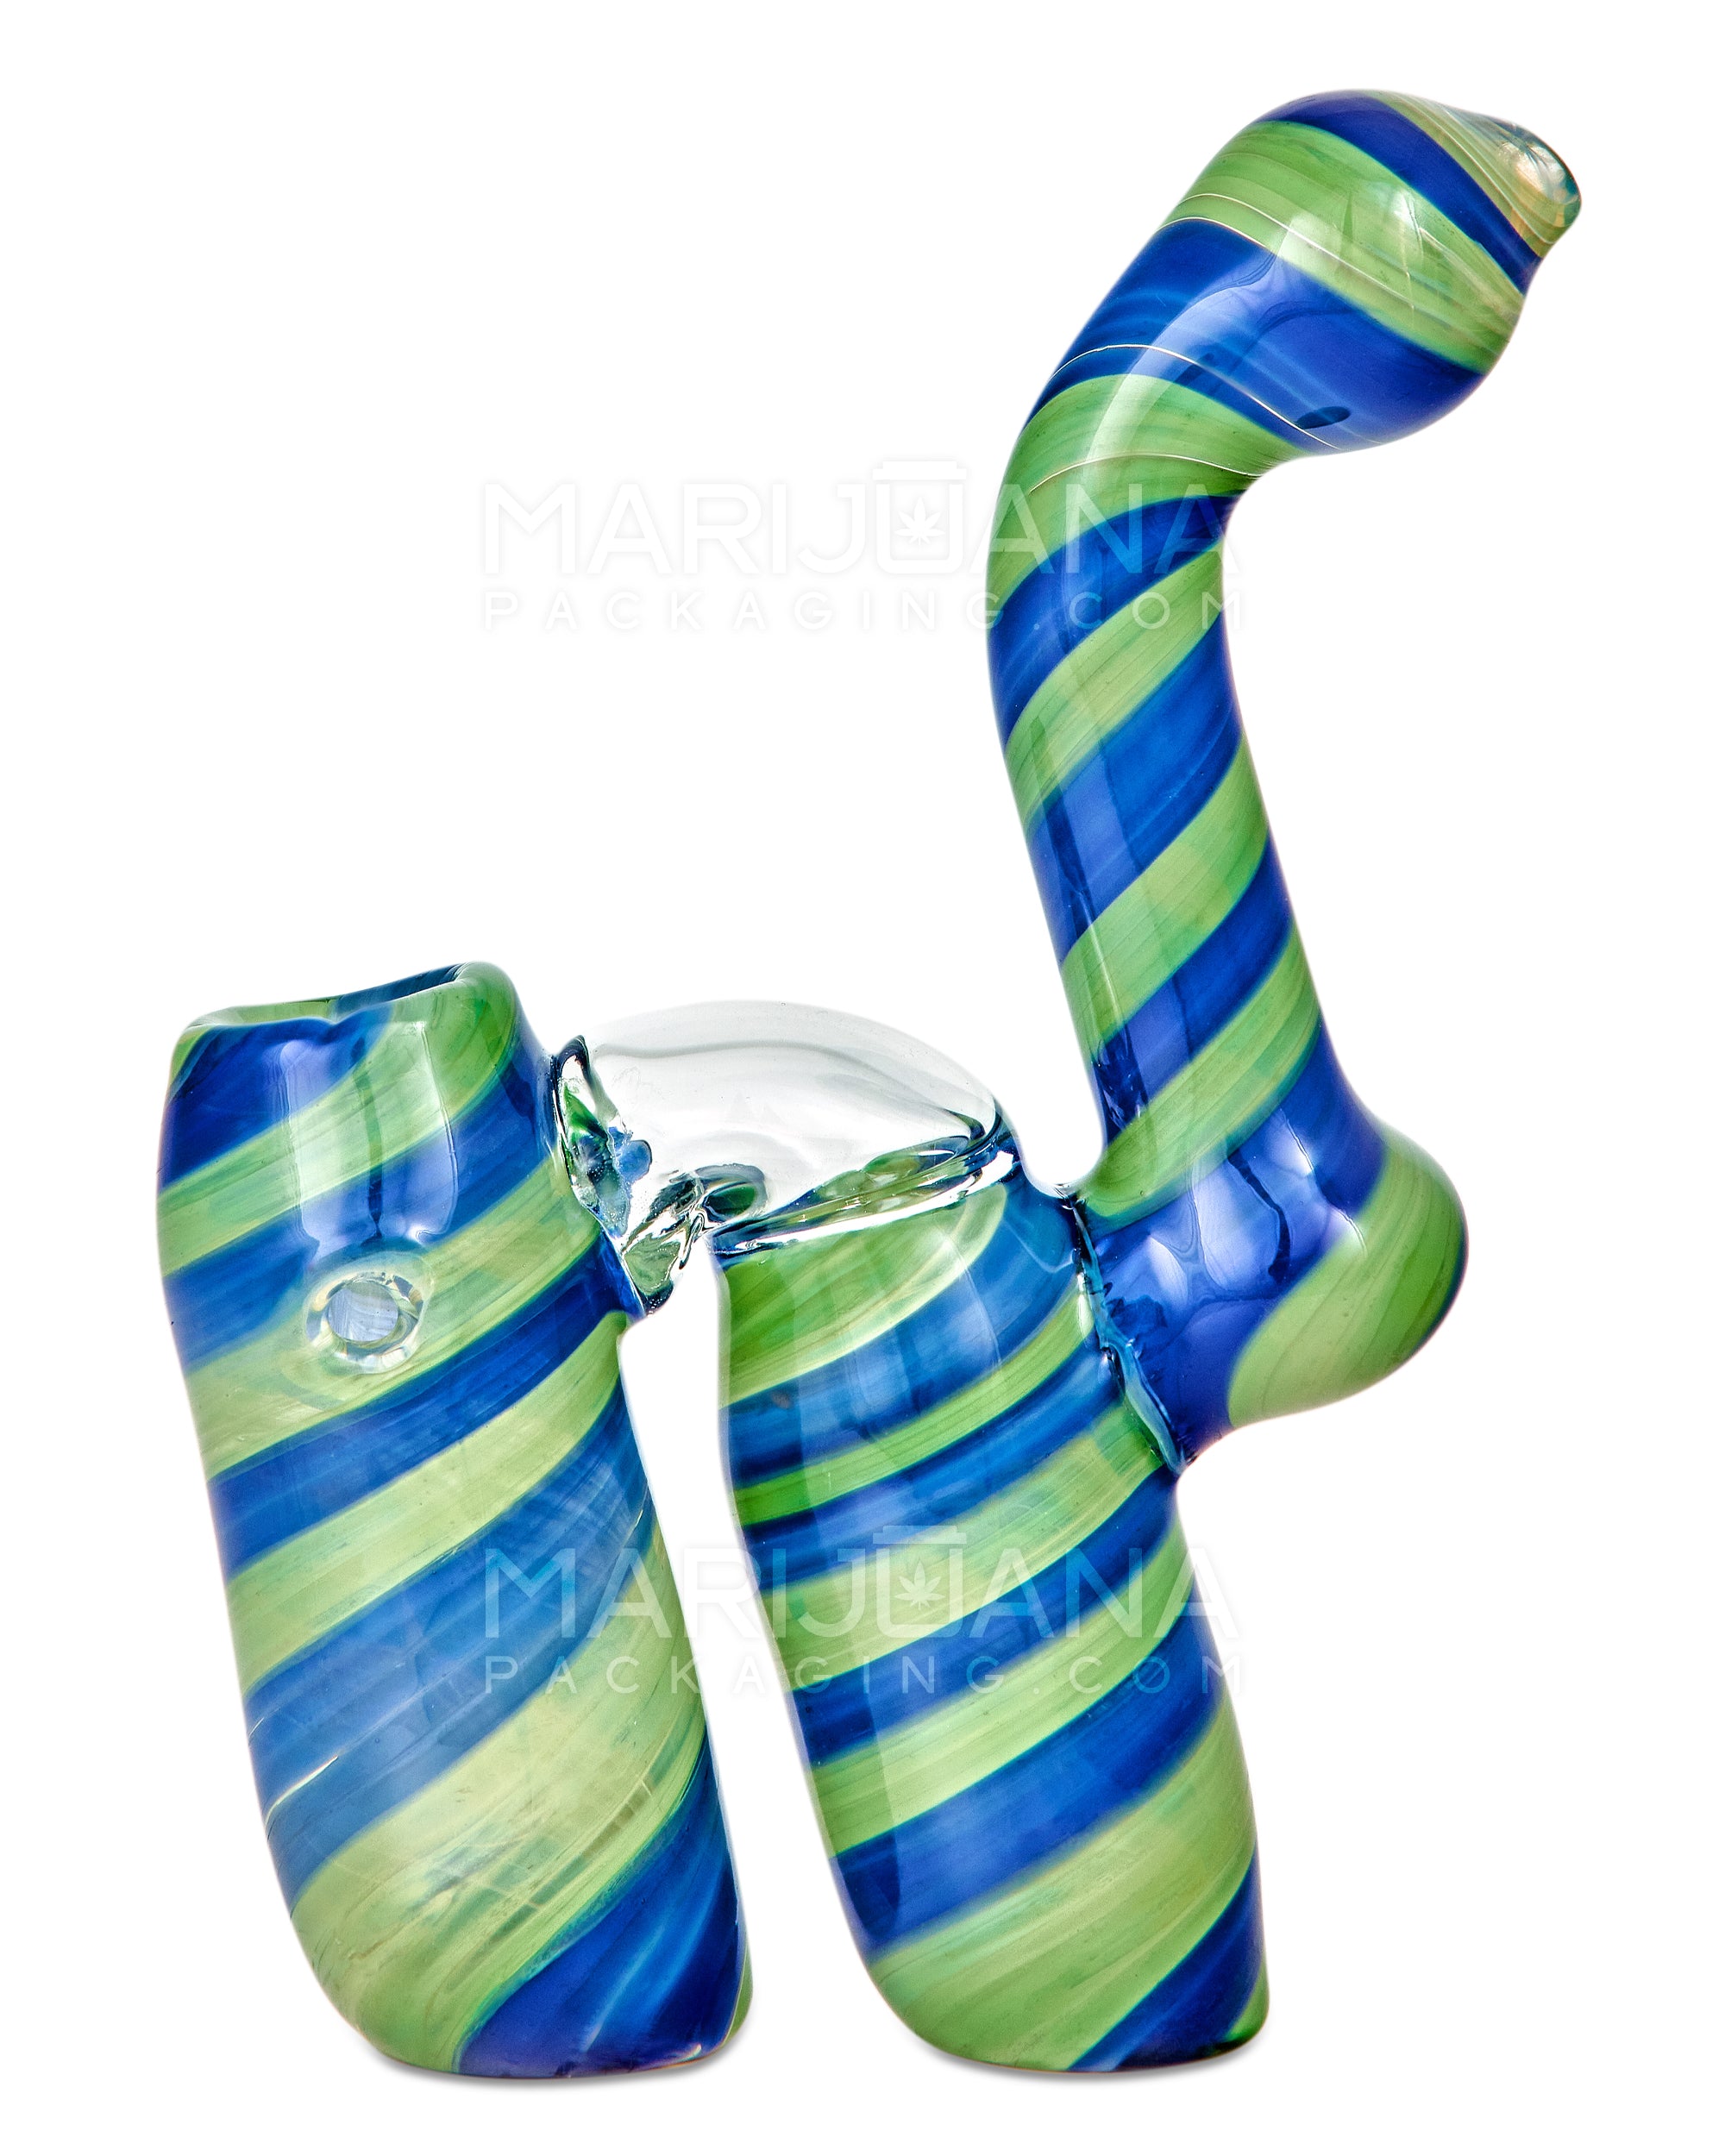 Spiral Double Chamber Bubbler | 6.5in Tall - Glass - Blue & Green - 5